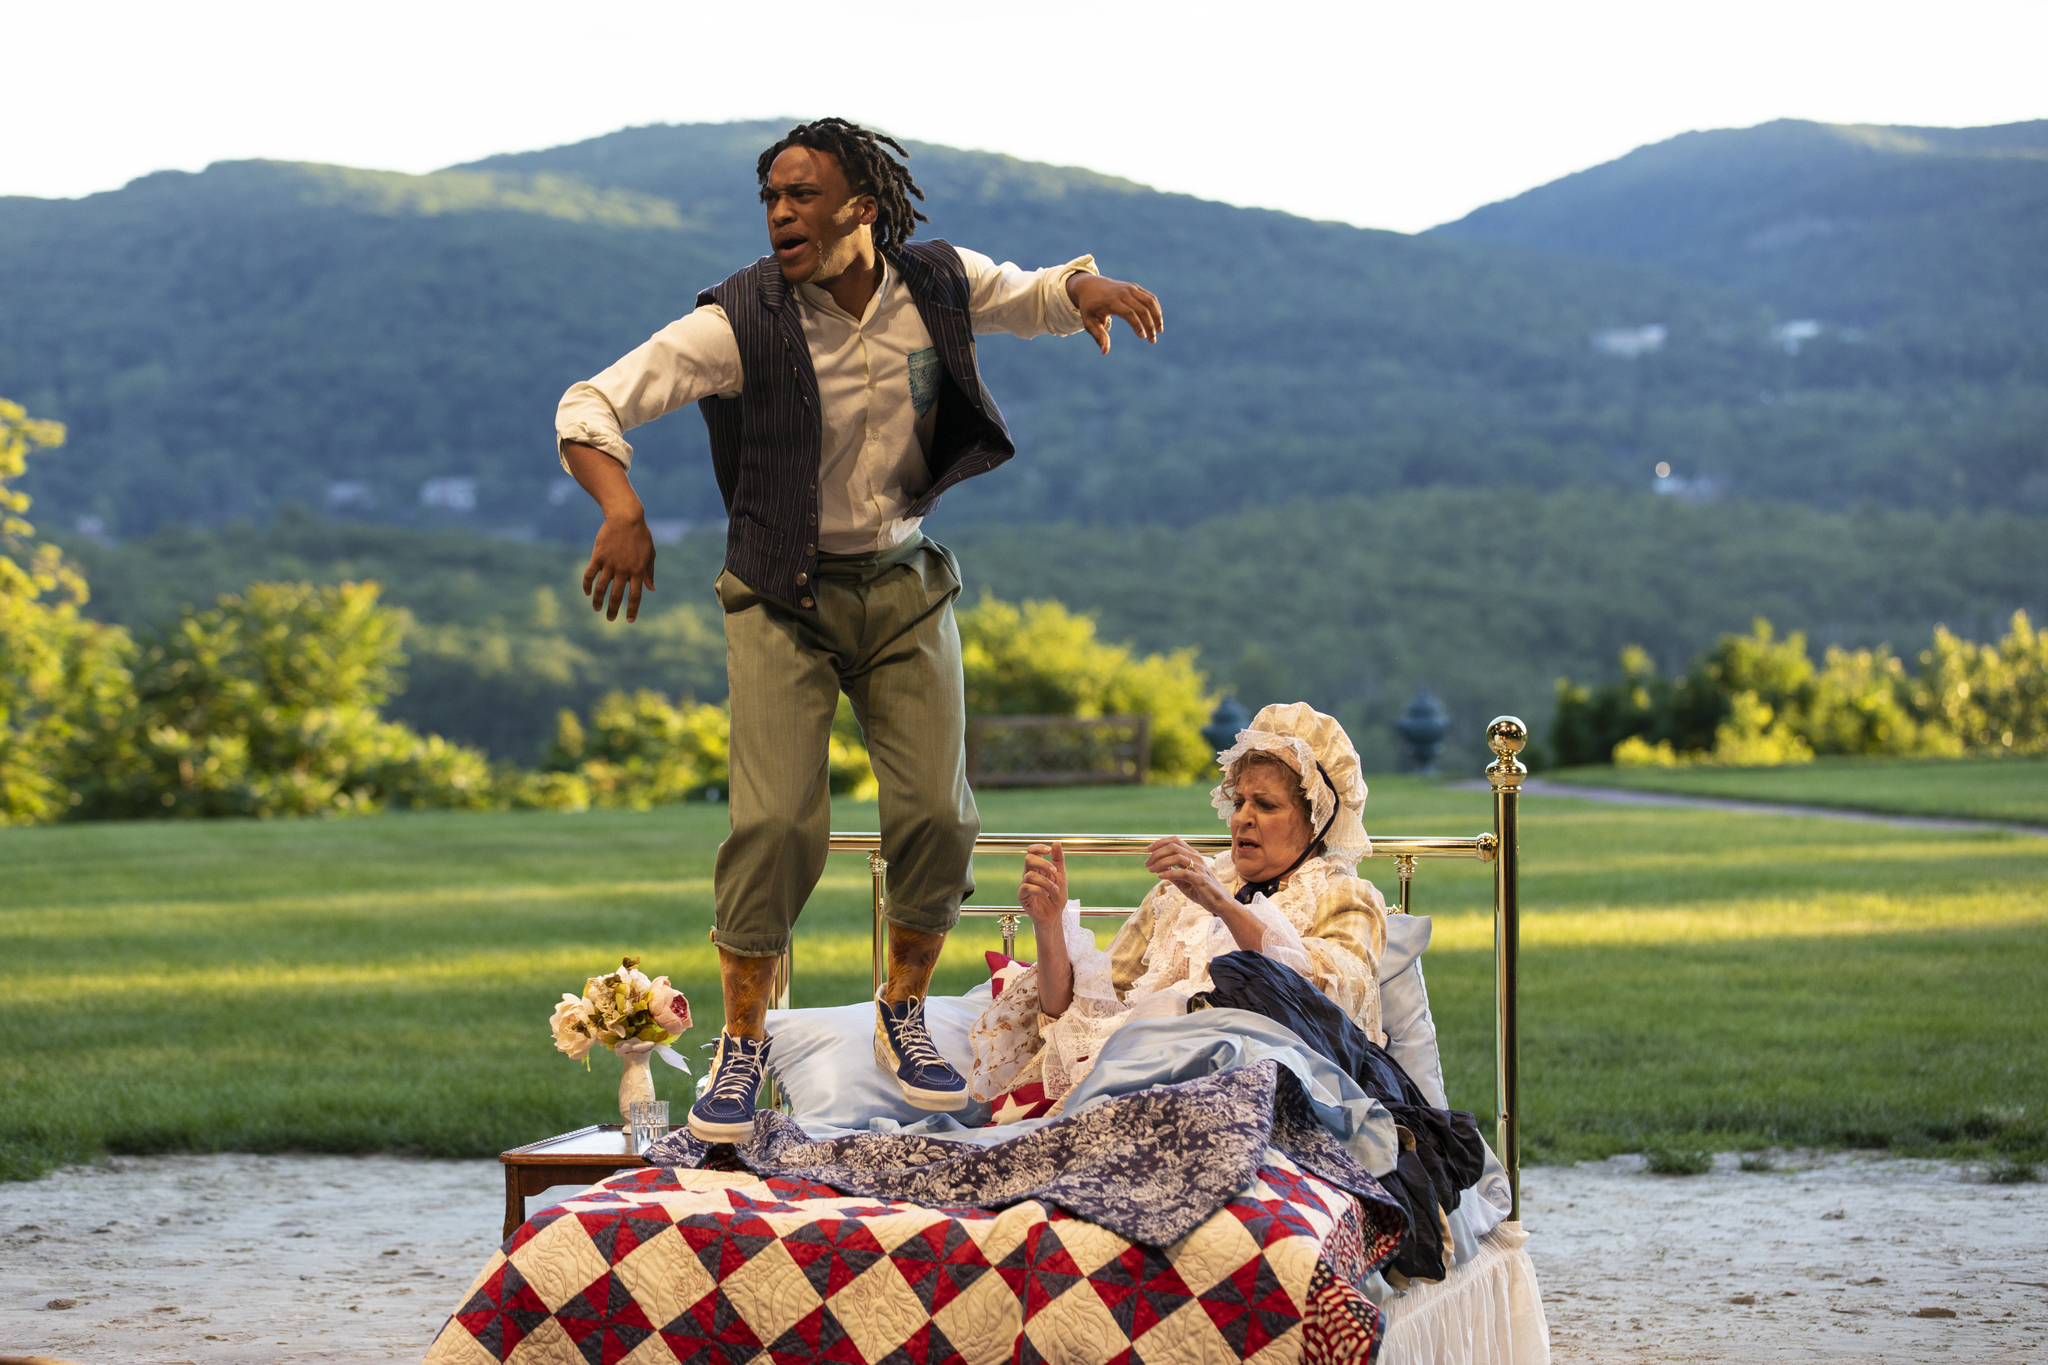 Hudson Valley Shakespeare Festival’s second act